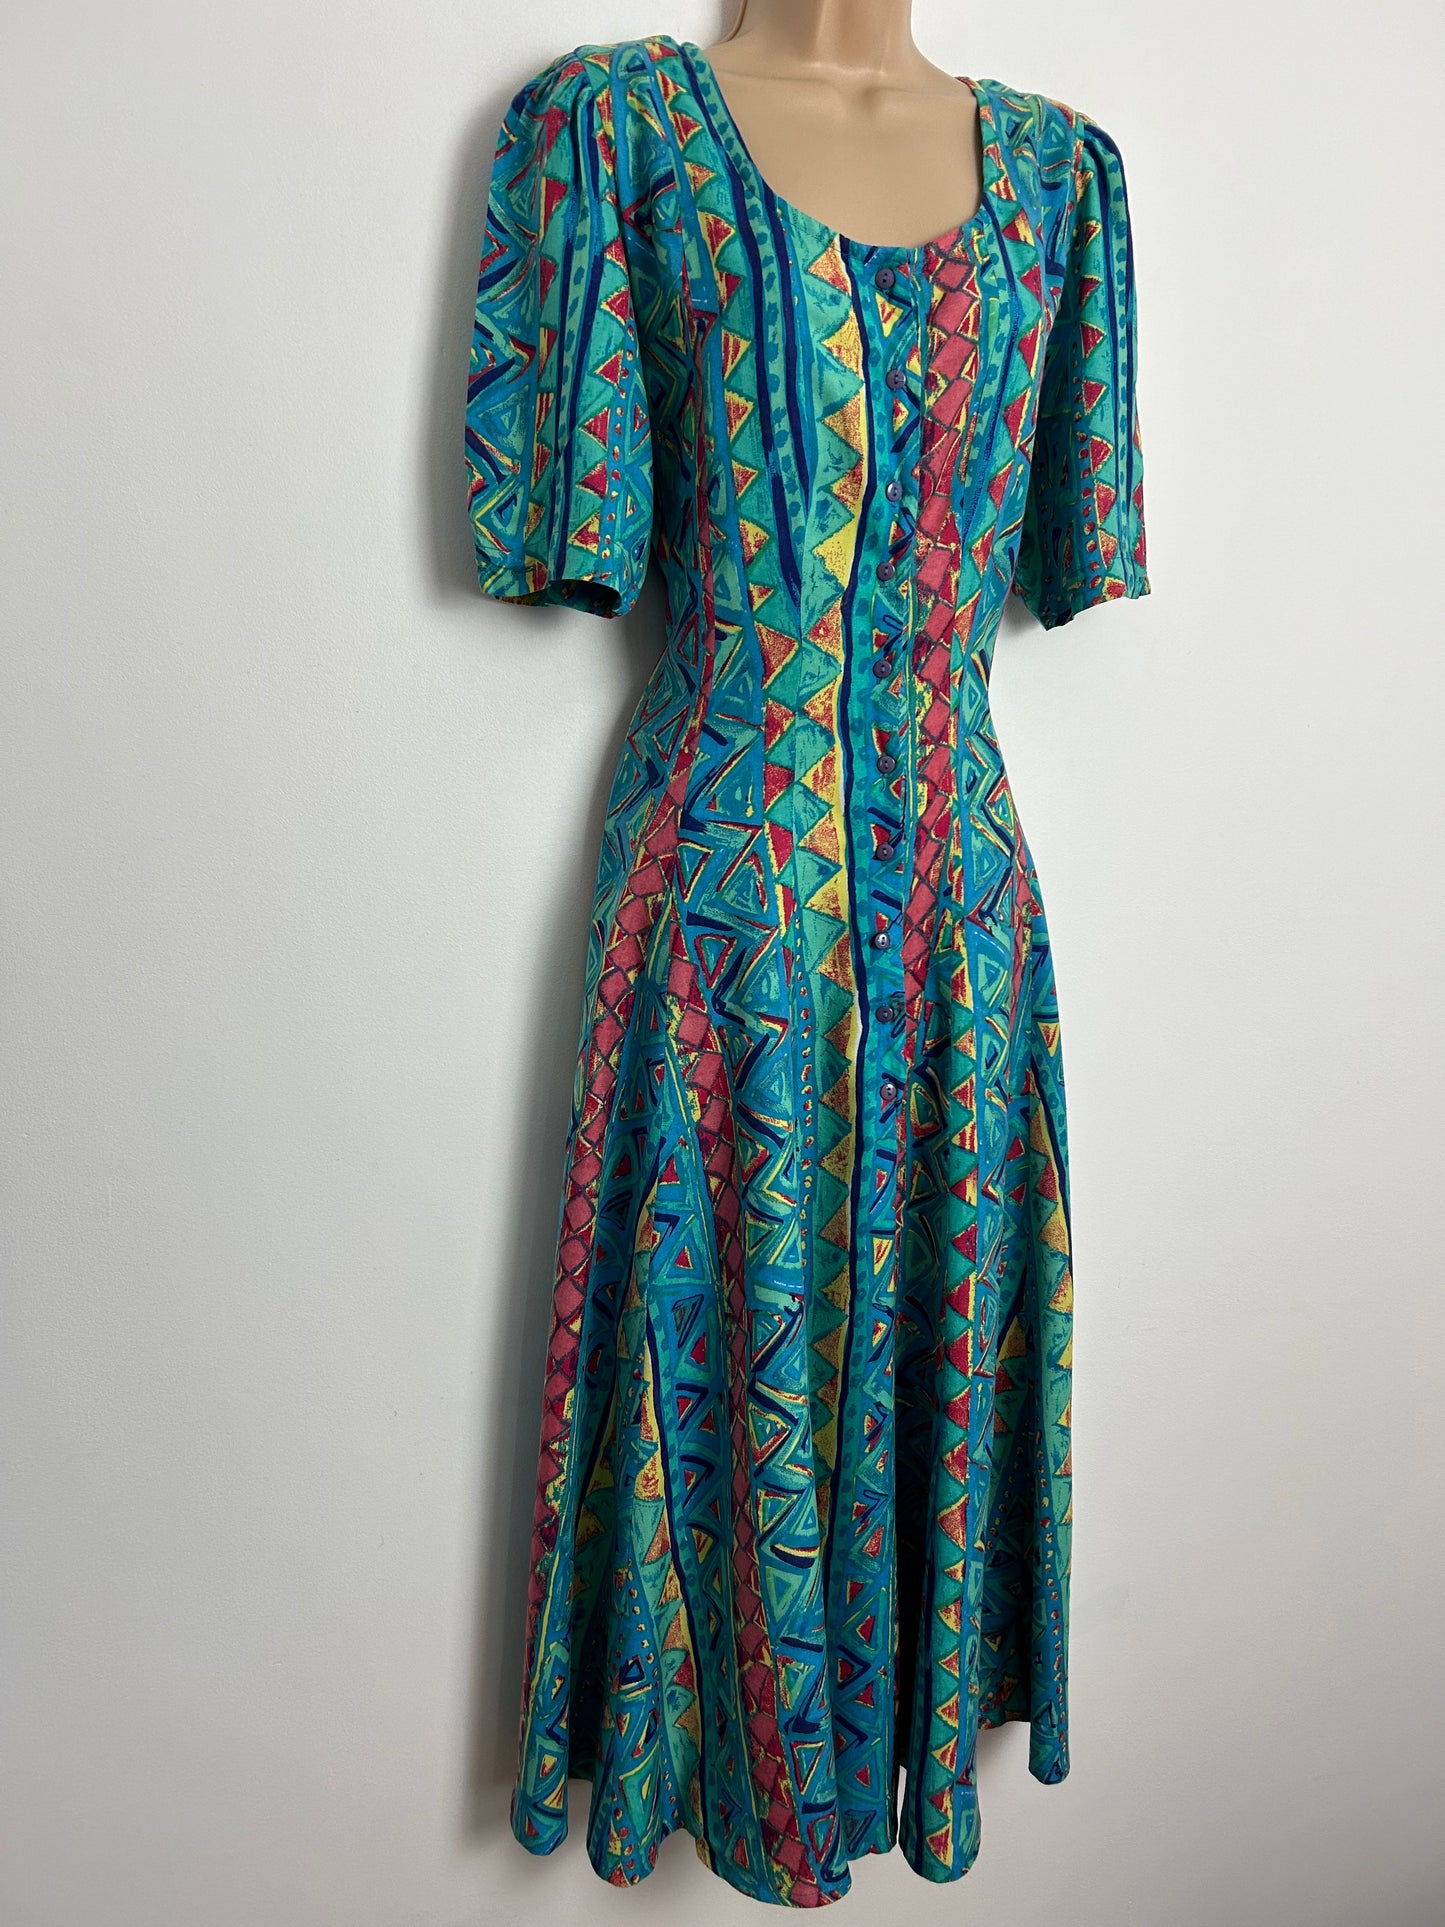 Vintage 1980s ADINI UK Size 10-12 (M) Blue Green Red & Yellow Abstract Geo Print Short Sleeve Flared Midi Dress